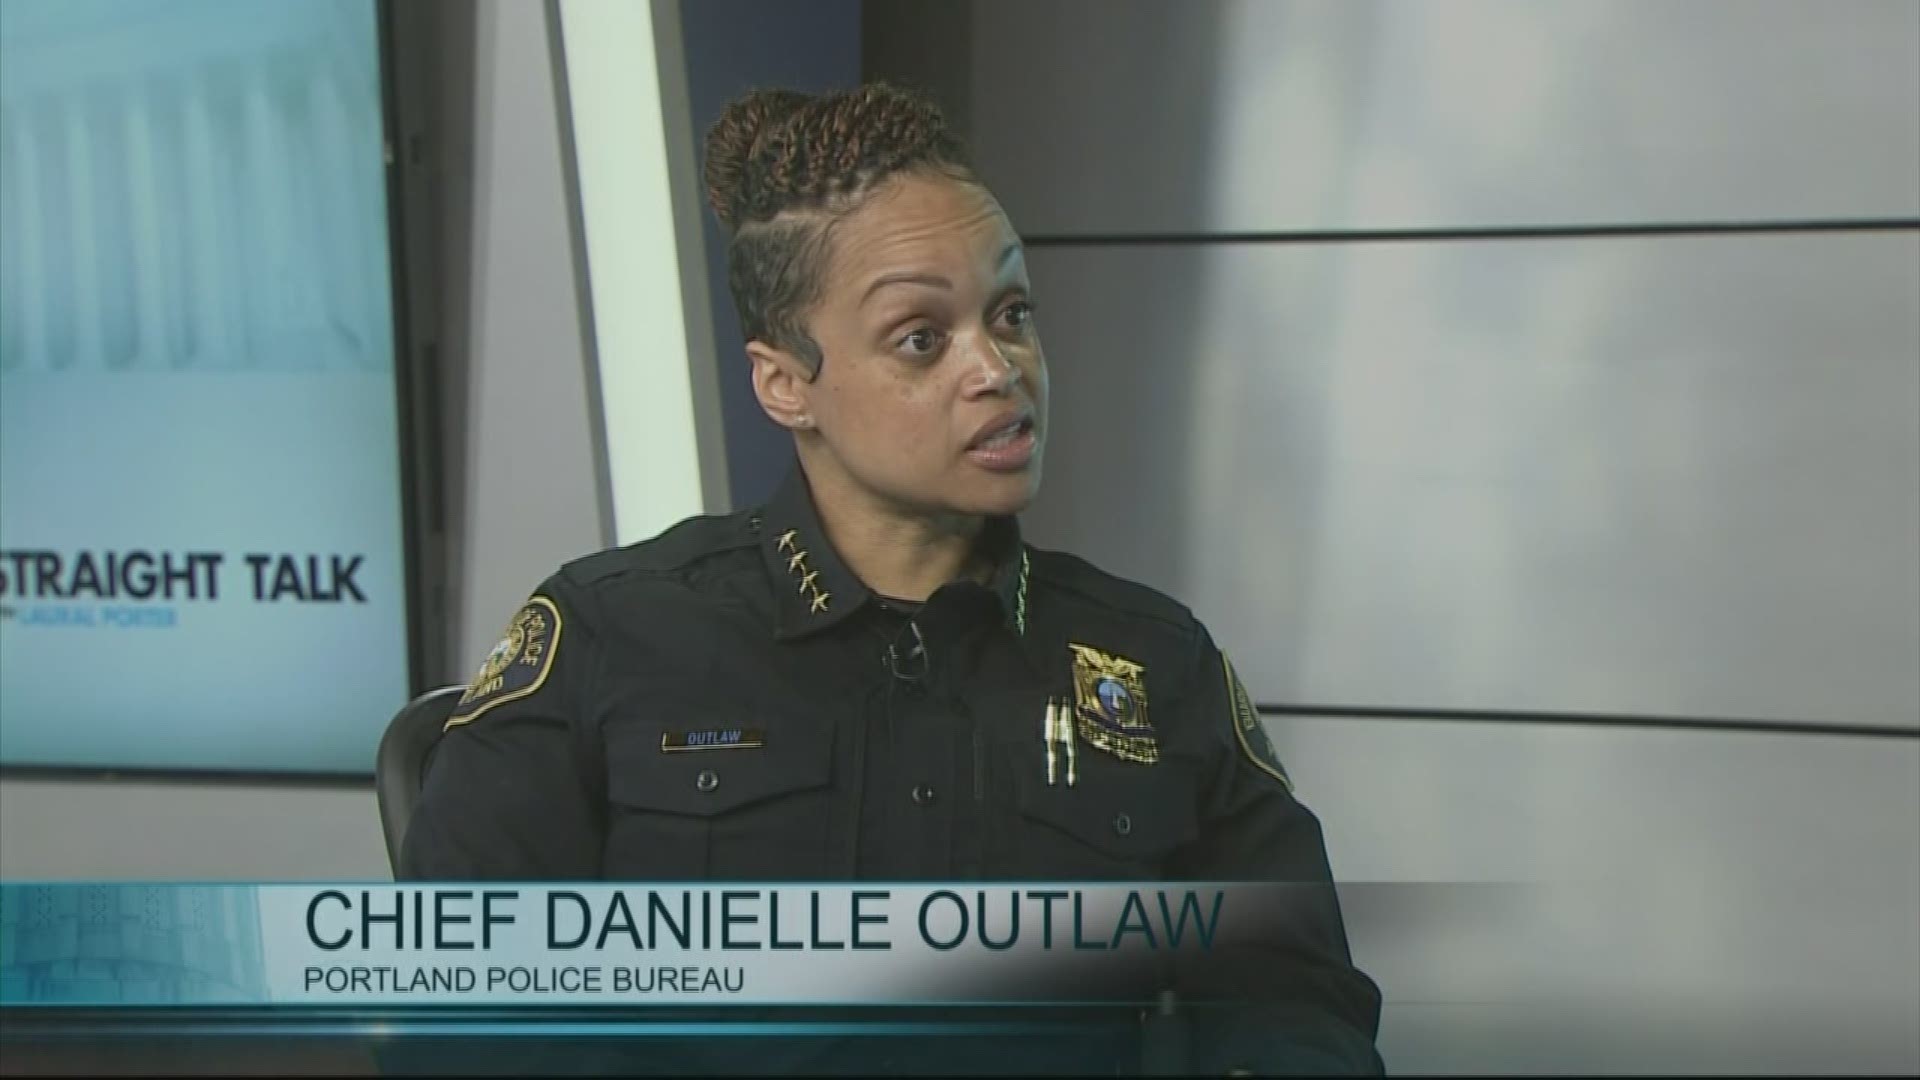 KGW's Cathy Marshall and Portland Police Chief Danielle Outlaw discuss Outlaw's first few months on the job.